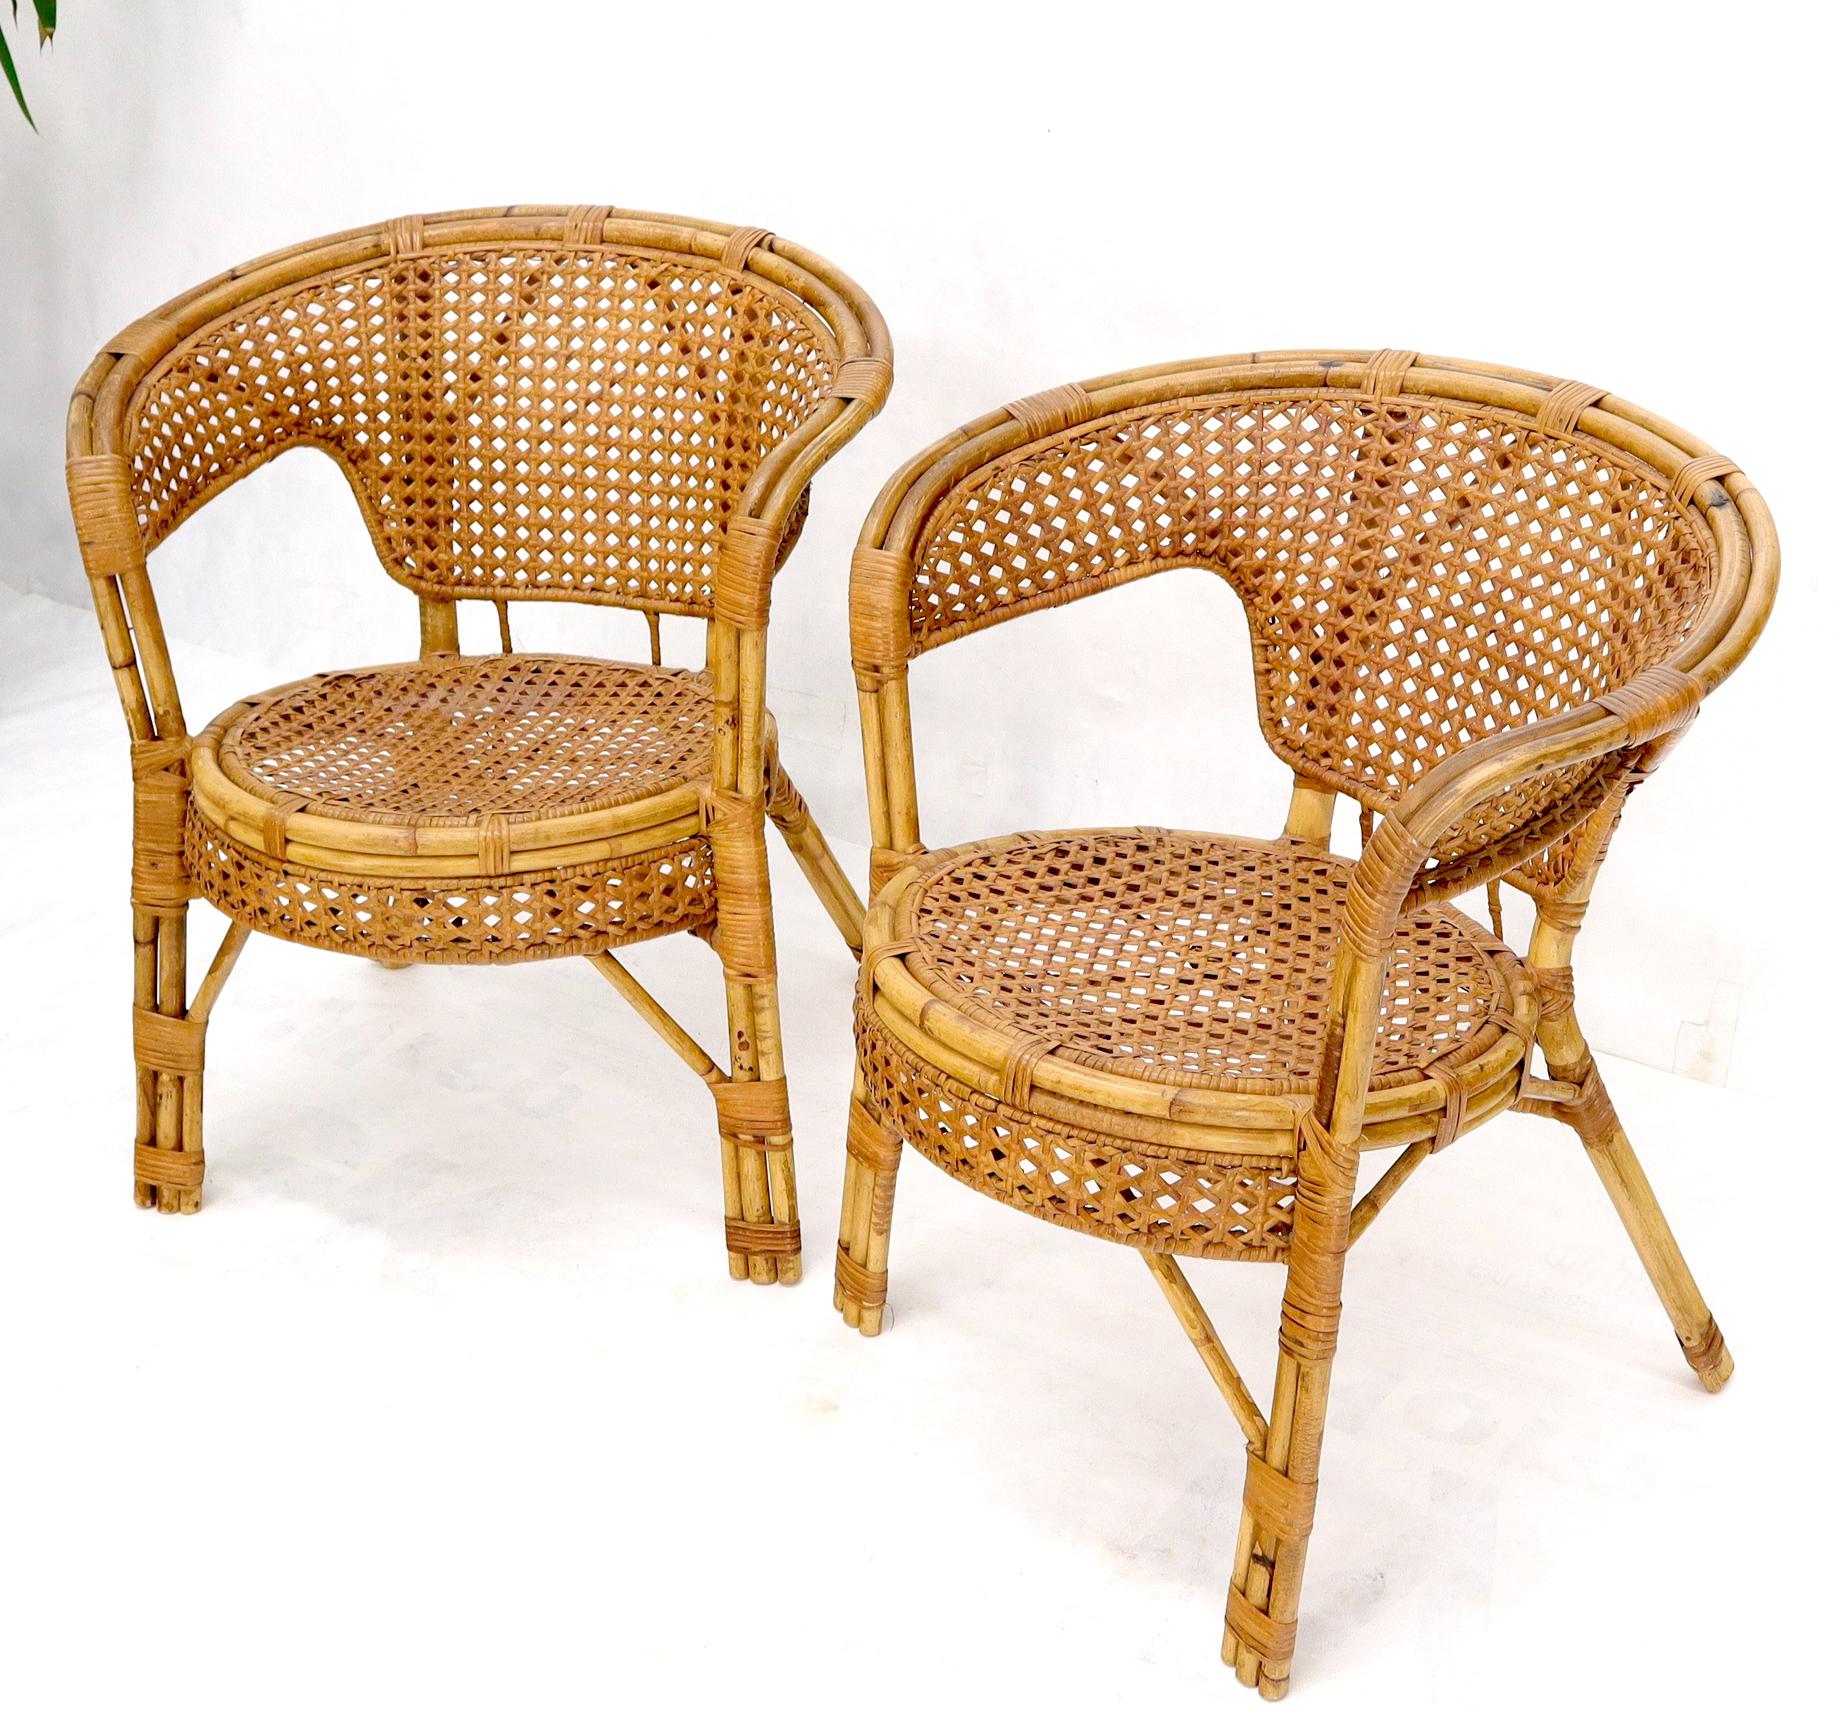 Pair of vintage rattan bamboo cane seat chairs.